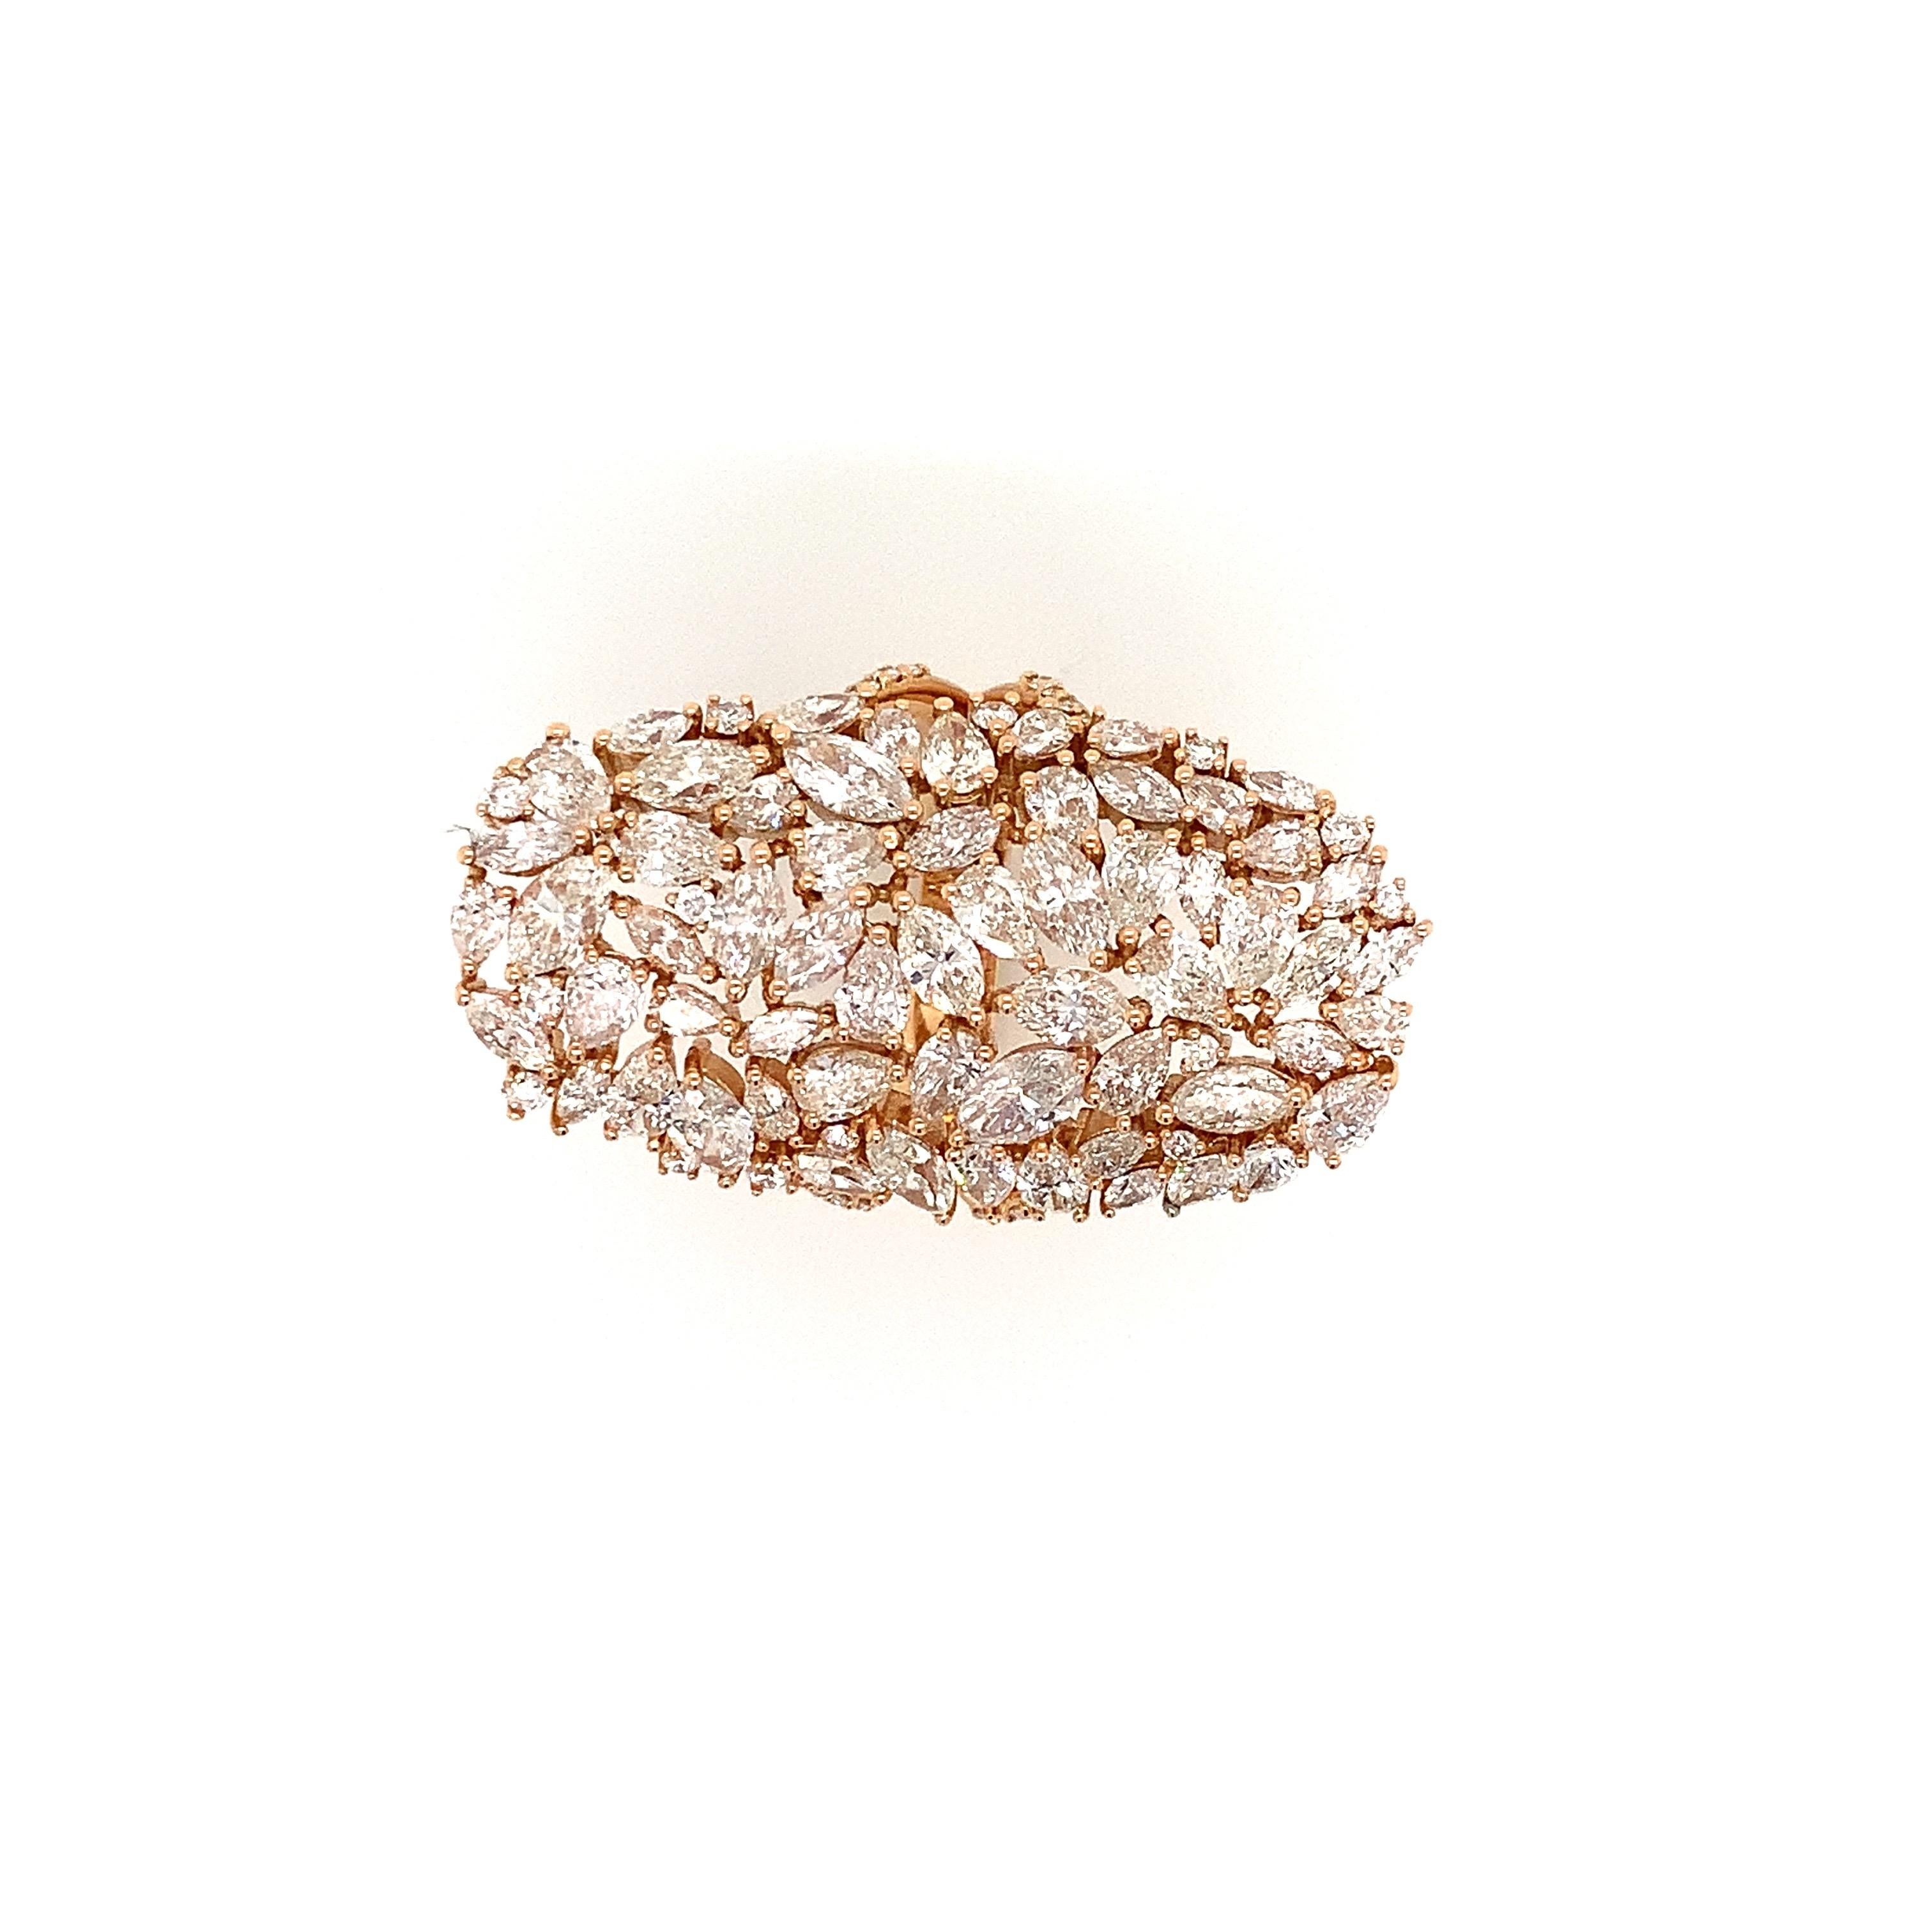 Breathtaking, handcrafted OWN Your Story 18K Rose Gold Pear, Marquise and Brilliant Diamond Statement Ring. 

OWN Your Story brings its 3 generations of family tradition and unparalleled experience with 18K gold, diamonds, and gemstones to create